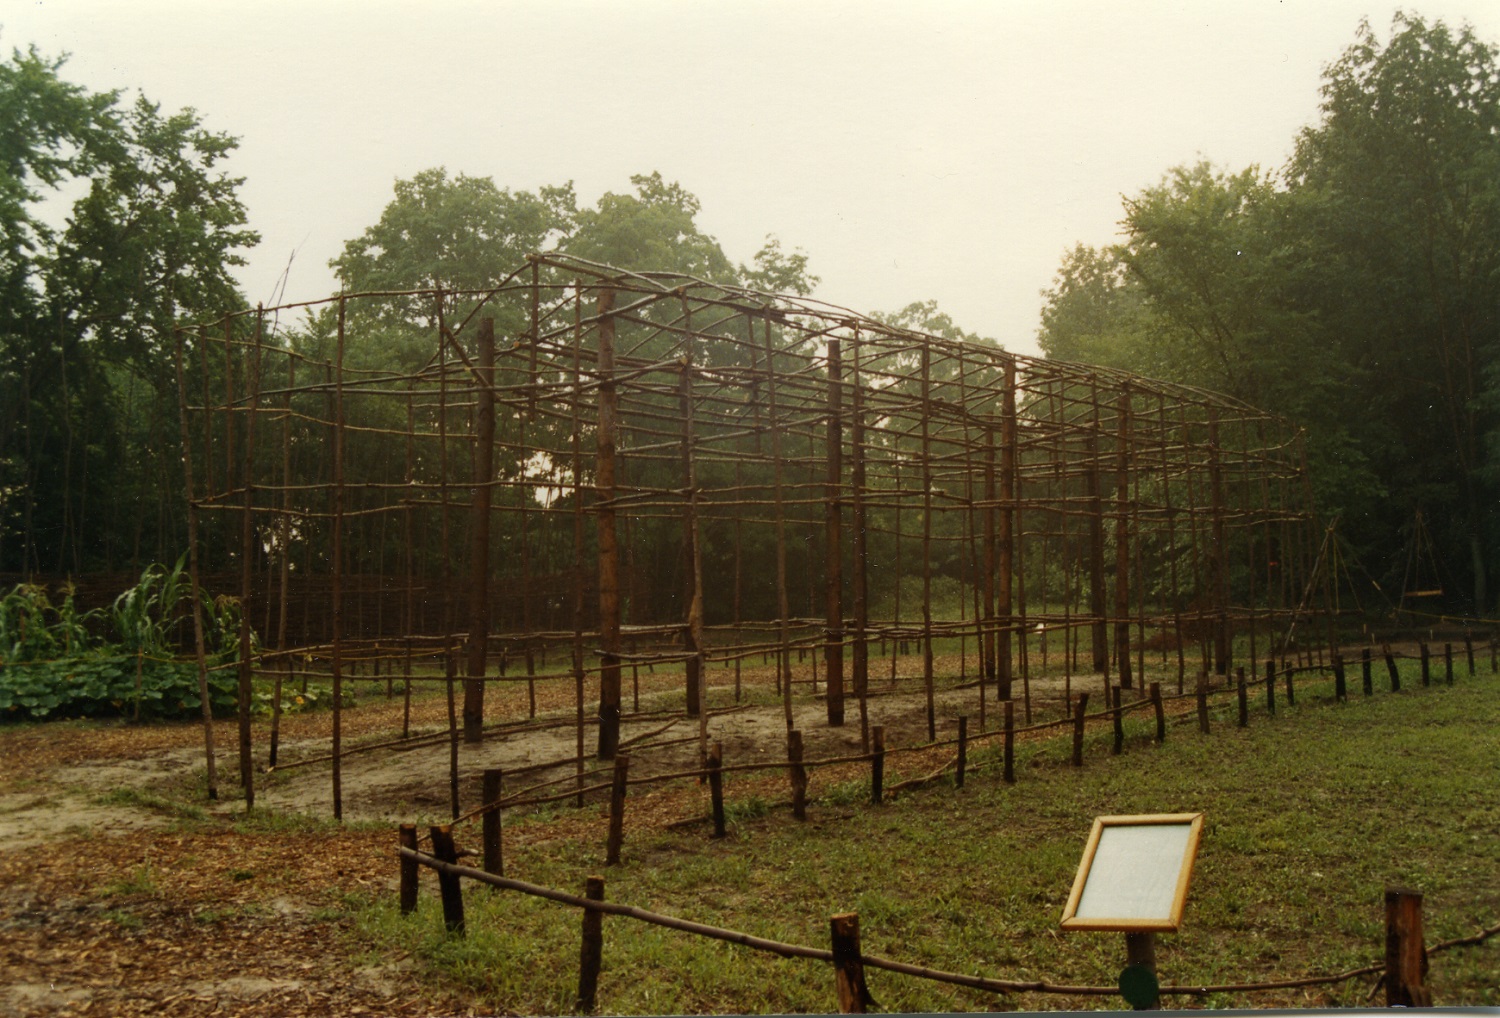 A hazy image of the 1980s frame of the reconstructed longhouse at the Lawson Site. The foreground also shows an outline of another longhouse marked with stakes and saplings in the grass. A plaque or sign is also visible but no legible text can be made out.